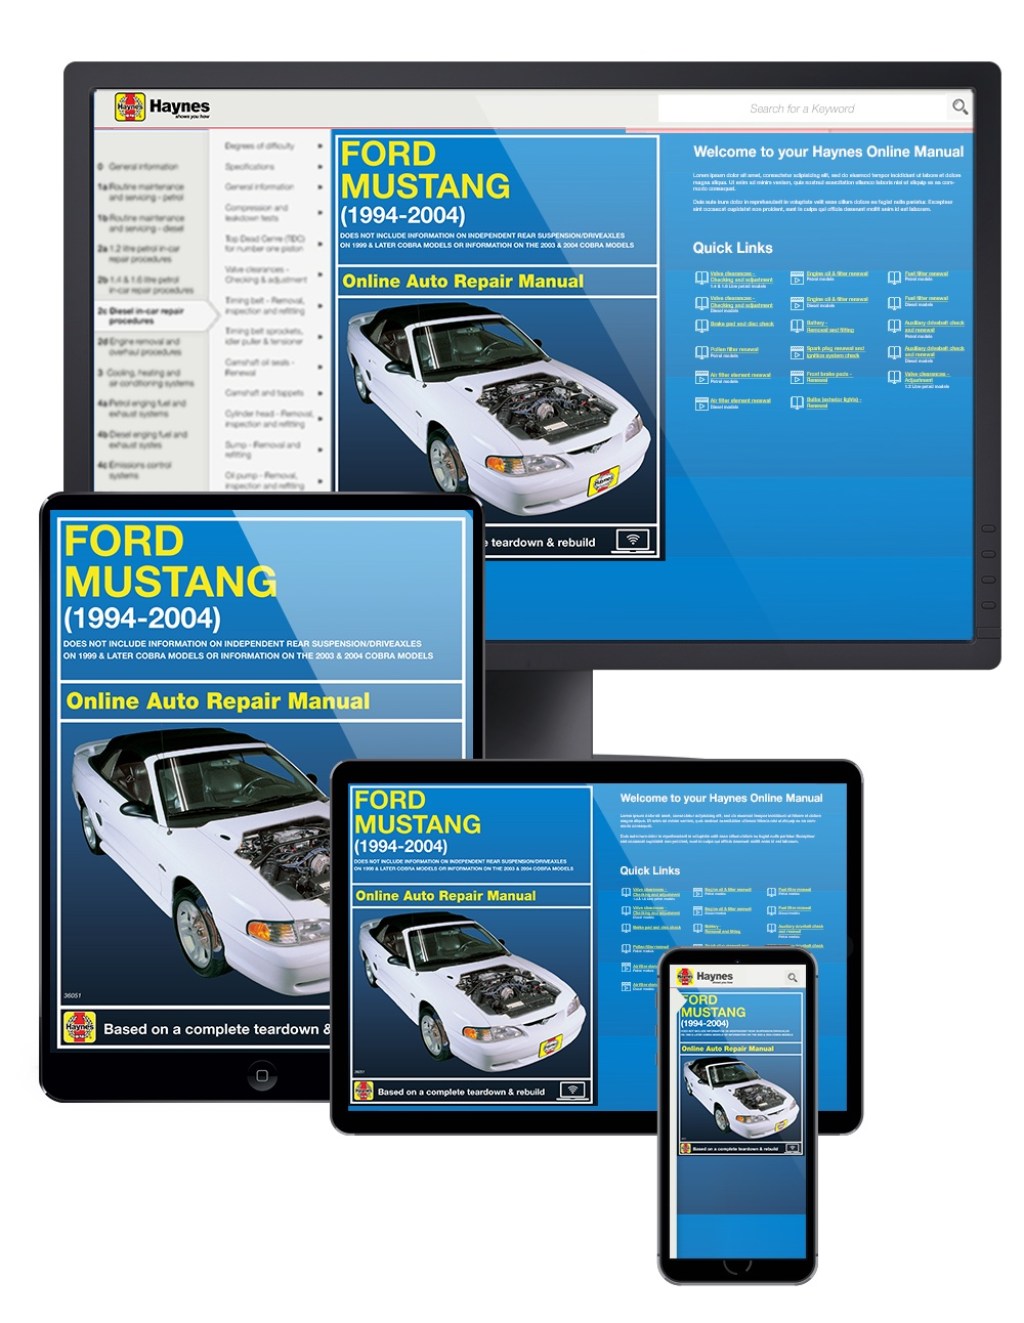 Picture of: Ford Mustang (-) Haynes Online Manuals